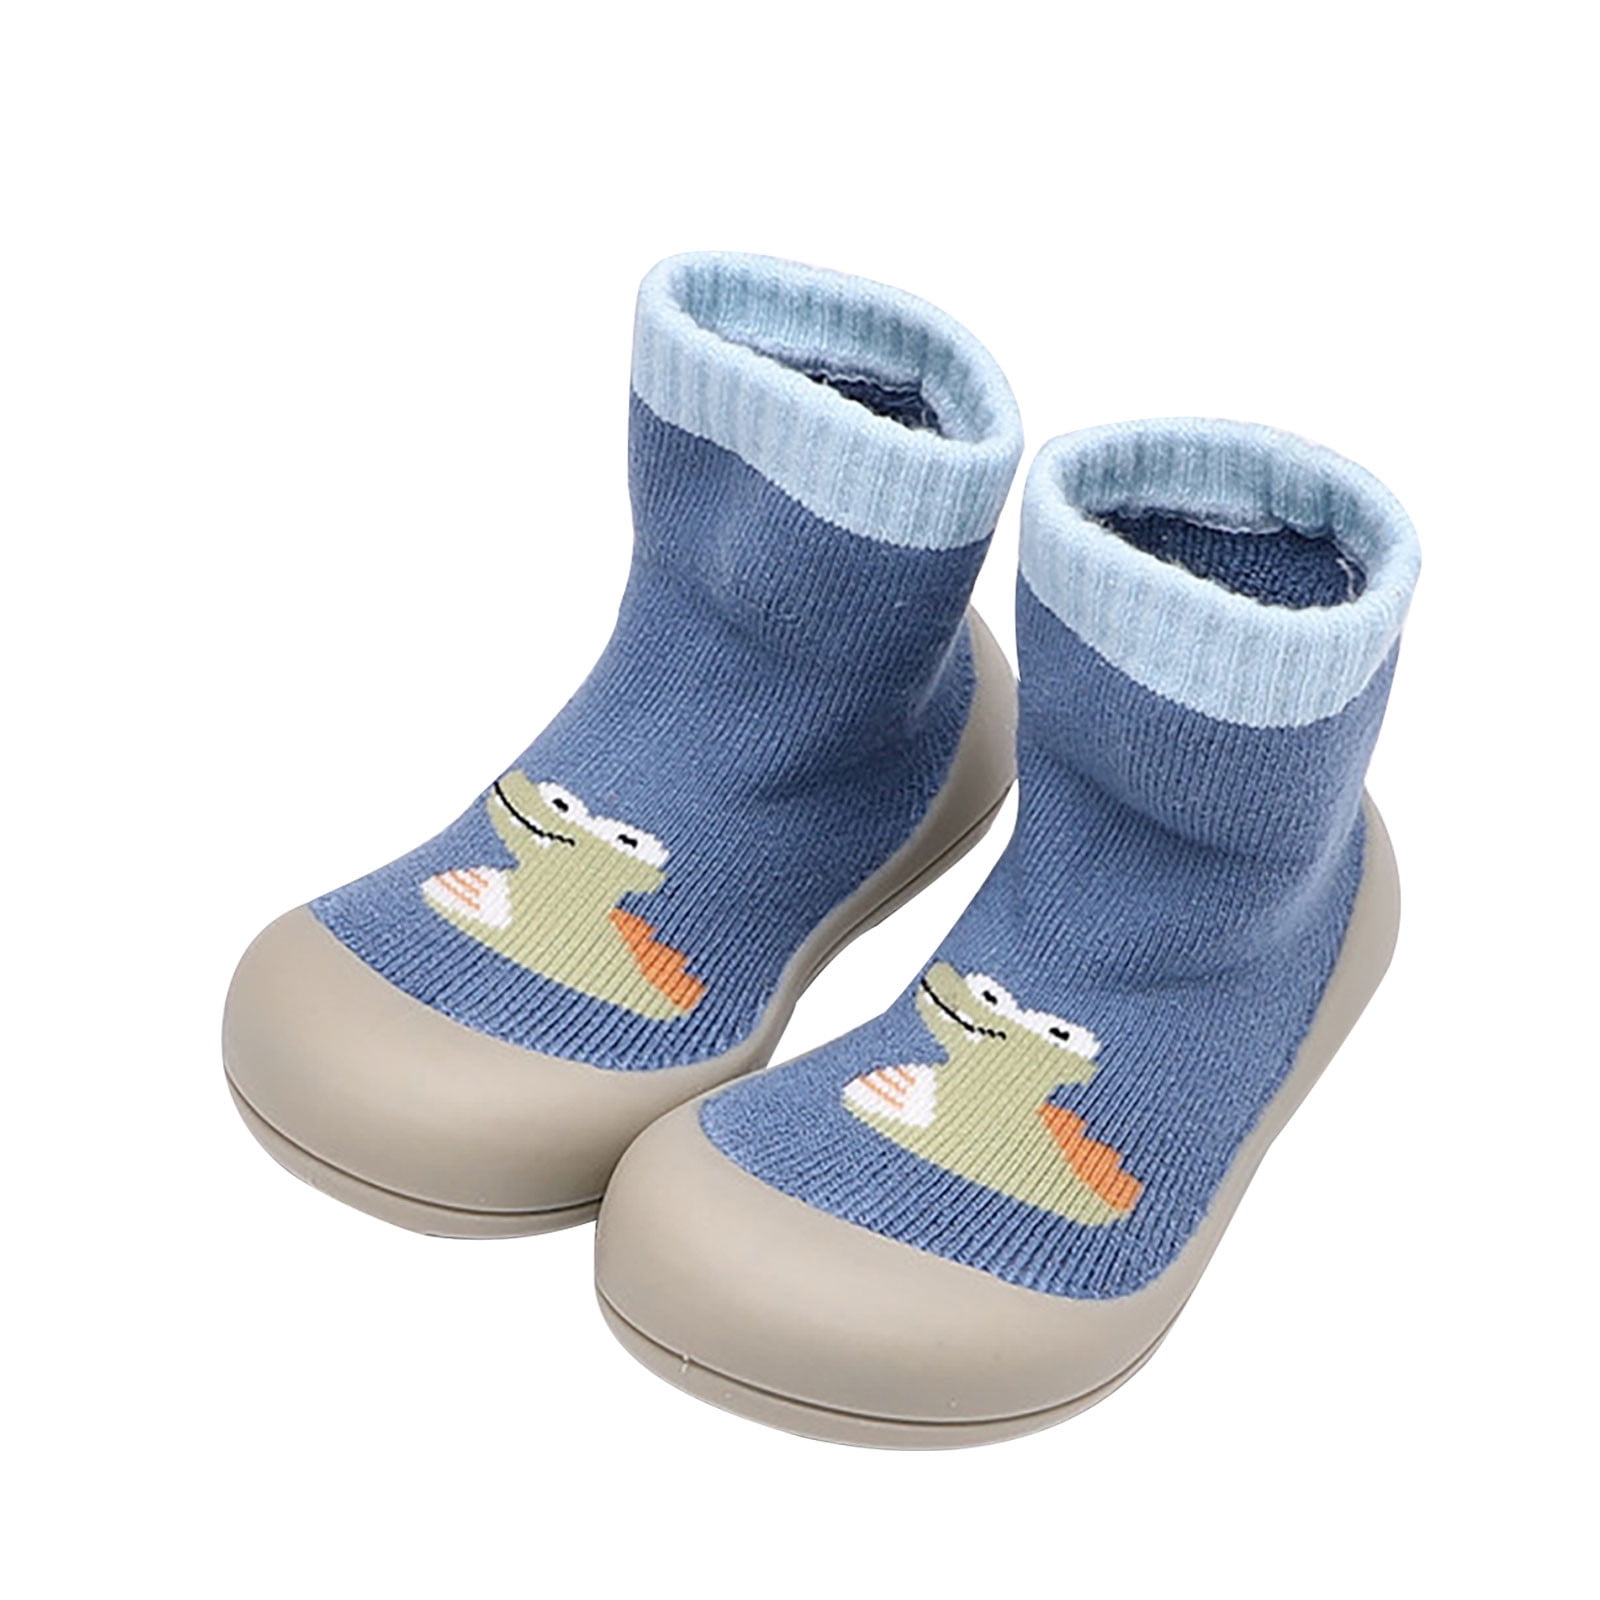 Lovskoo Baby Non Slip Grip Socks Barefoot Shoes First Walkers Toddler Boys  Breathable Kids Cartoon Thicken Indoor Toddler for 3 Months-4 Years Blue 